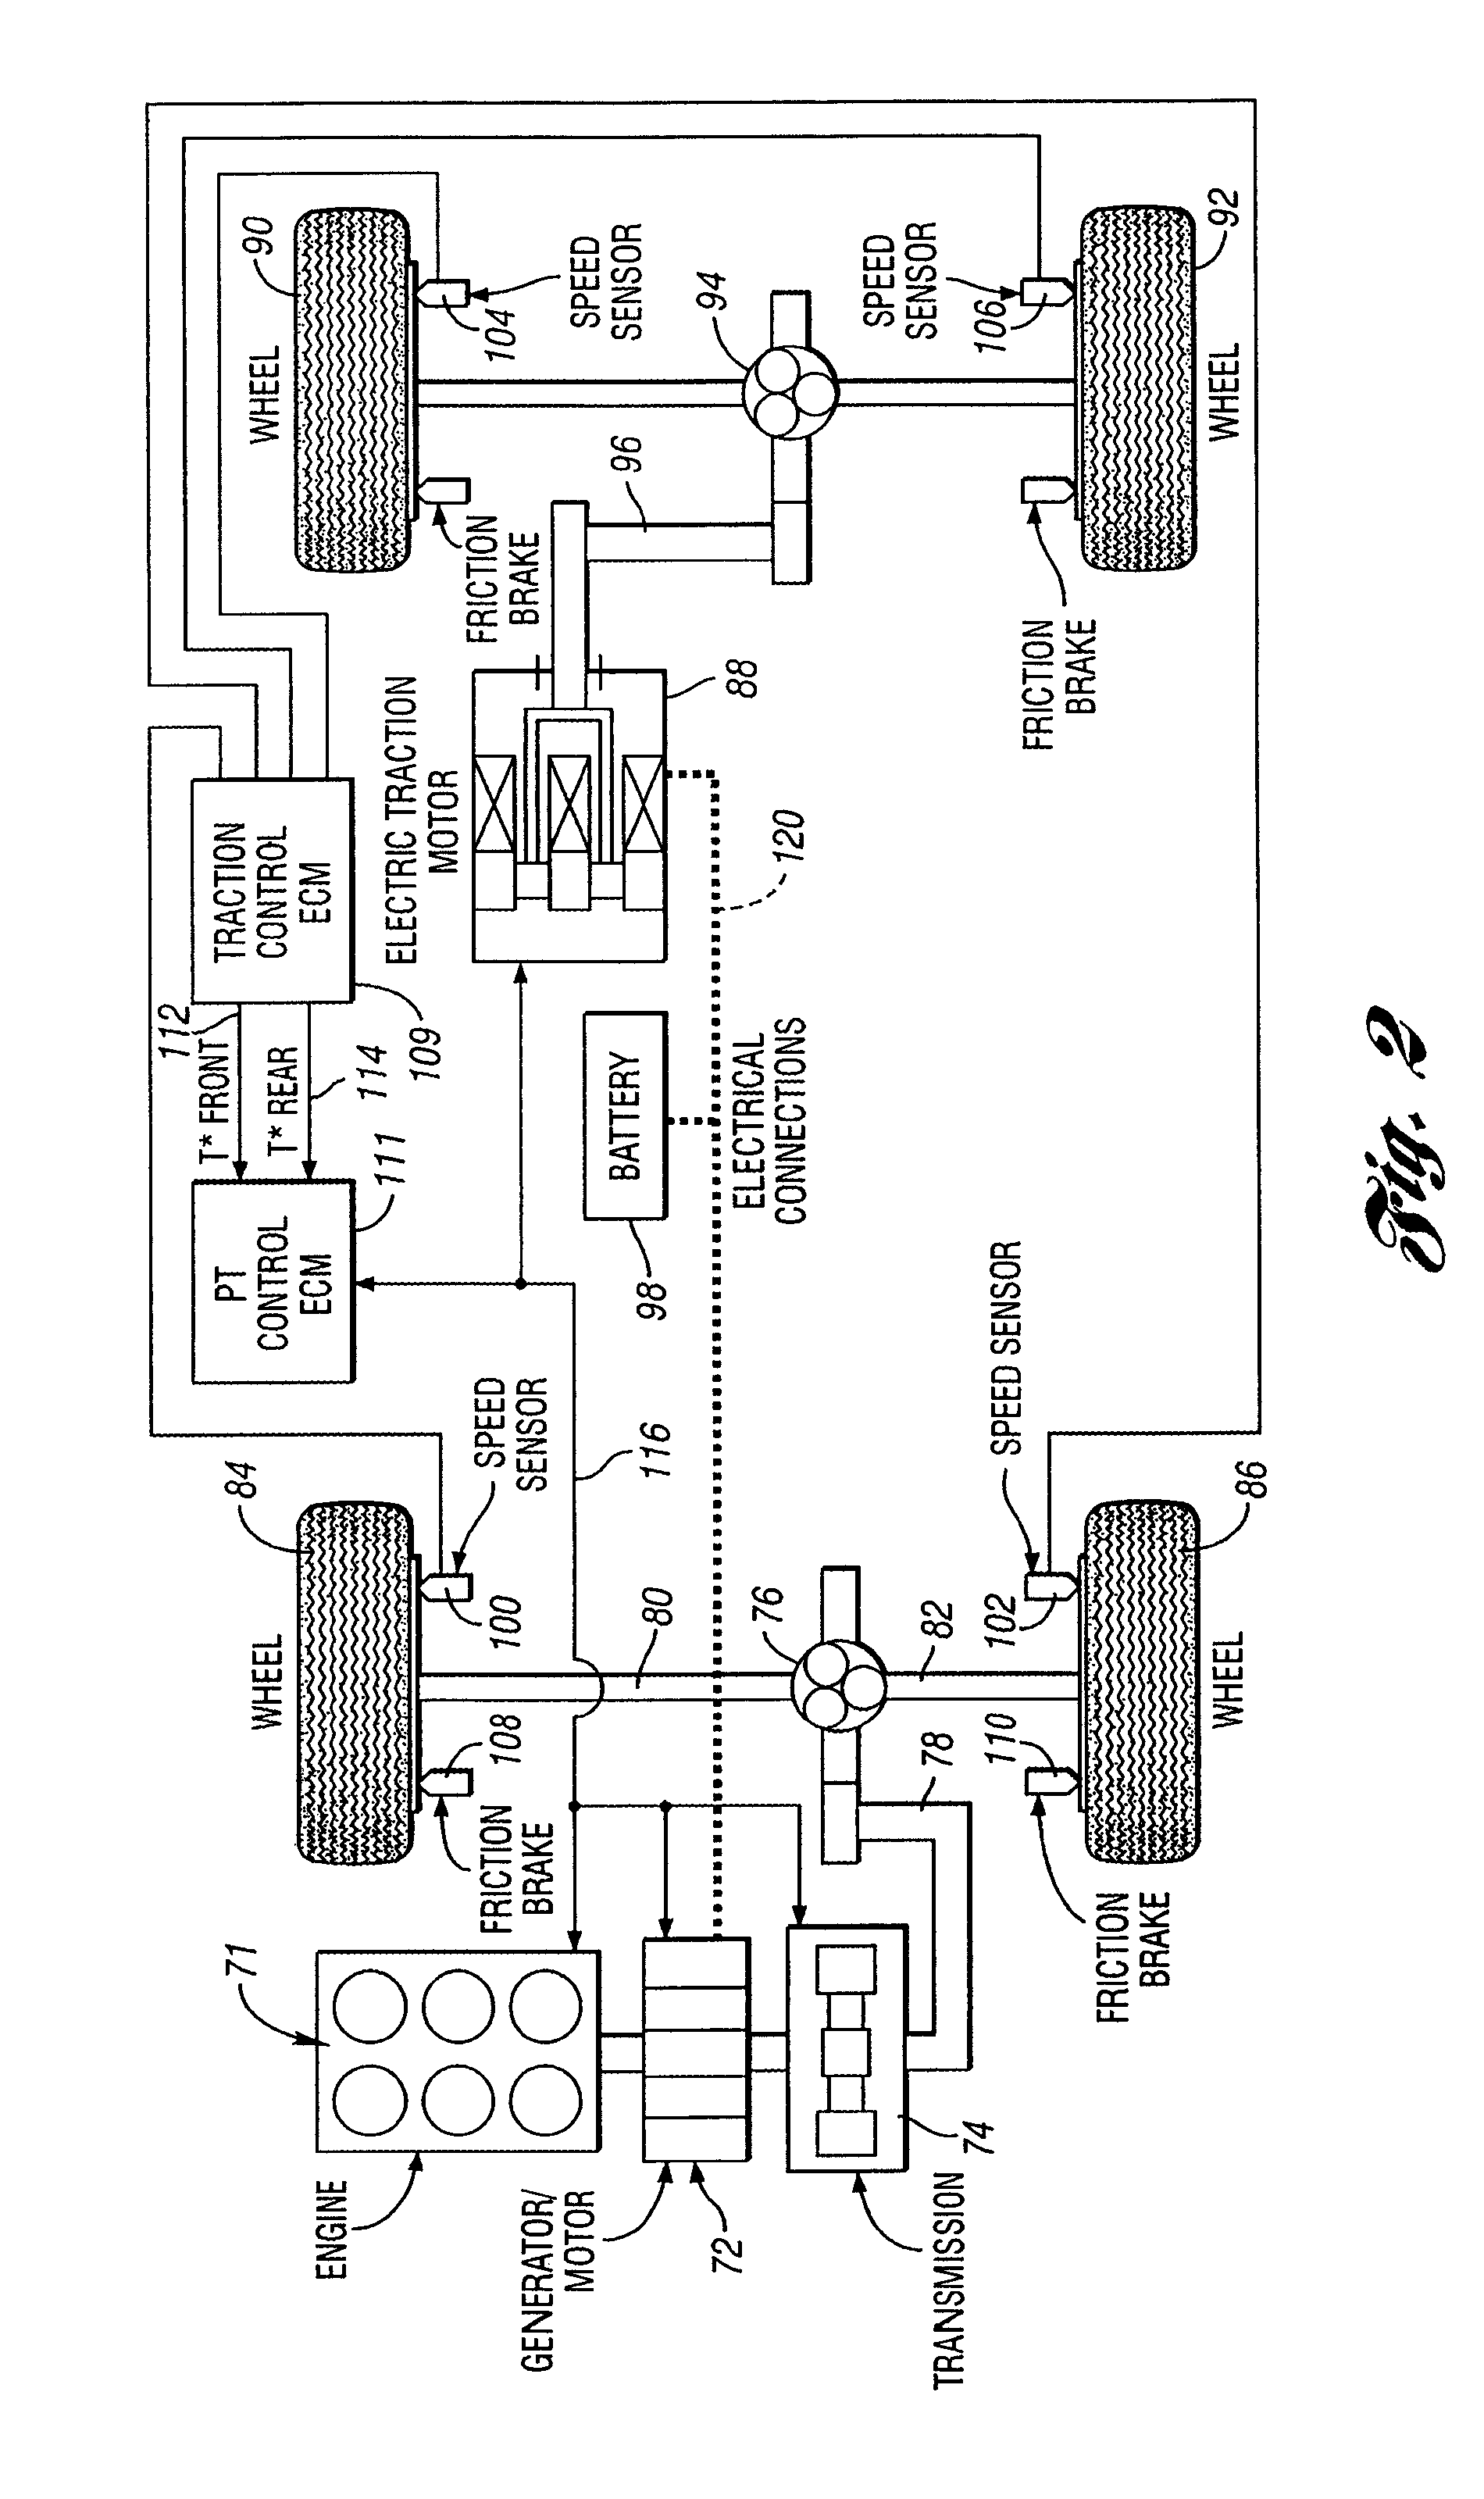 Traction and stability control system and method for a vehicle with mechanically independent front and rear traction wheels